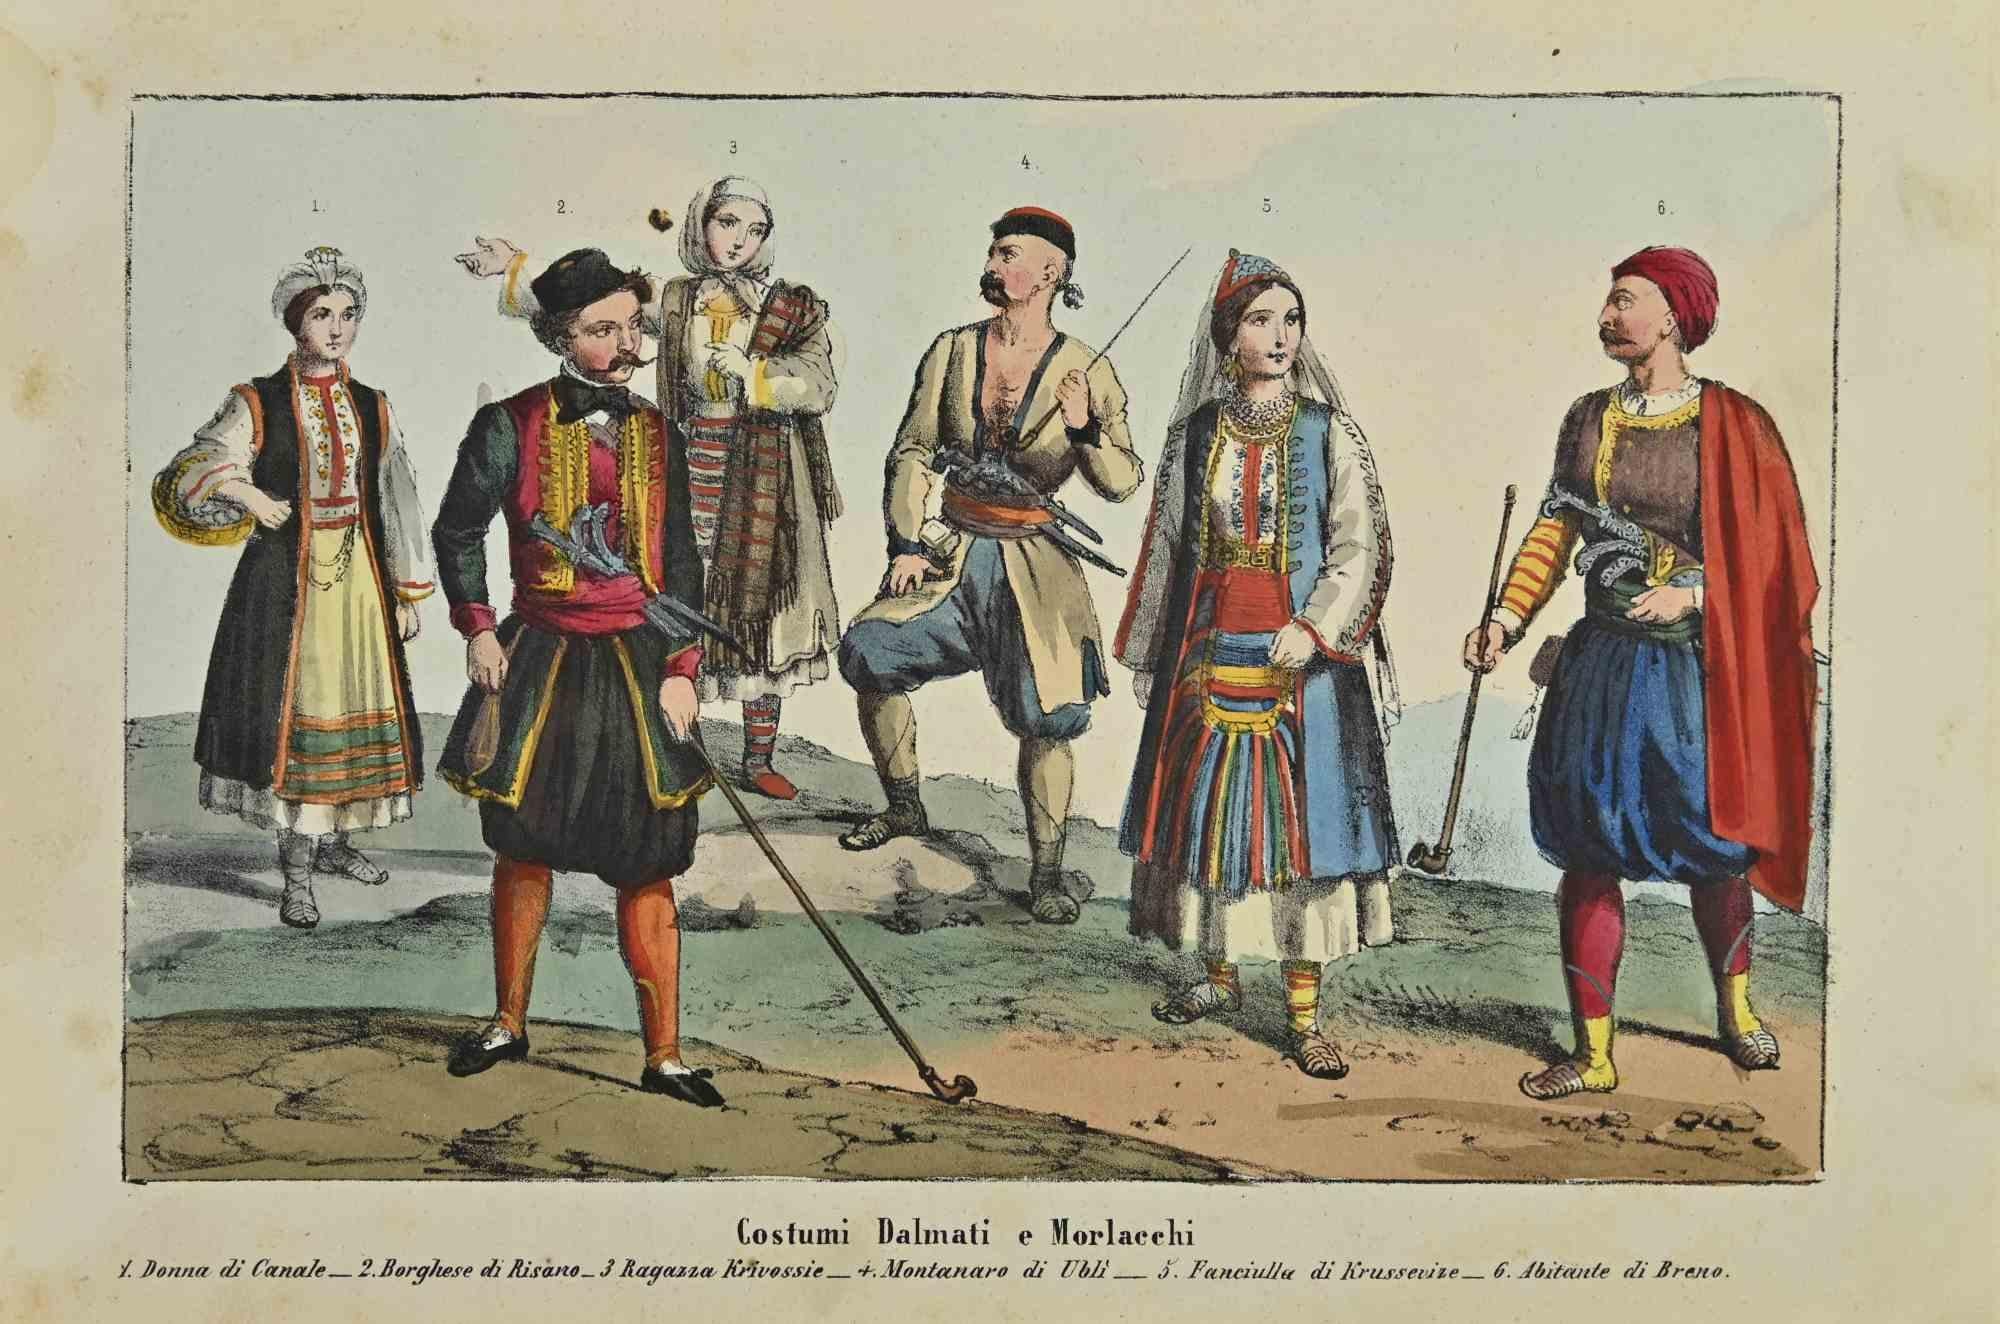 Dalmatian and Morlacchi Customs is a lithograph made by Auguste Wahlen in 1844.

Hand colored.

Good condition.

At the center of the artwork is the original title "Dalmatian and Morlacchi Costumes".

The work is part of Suite Moeurs, usages et